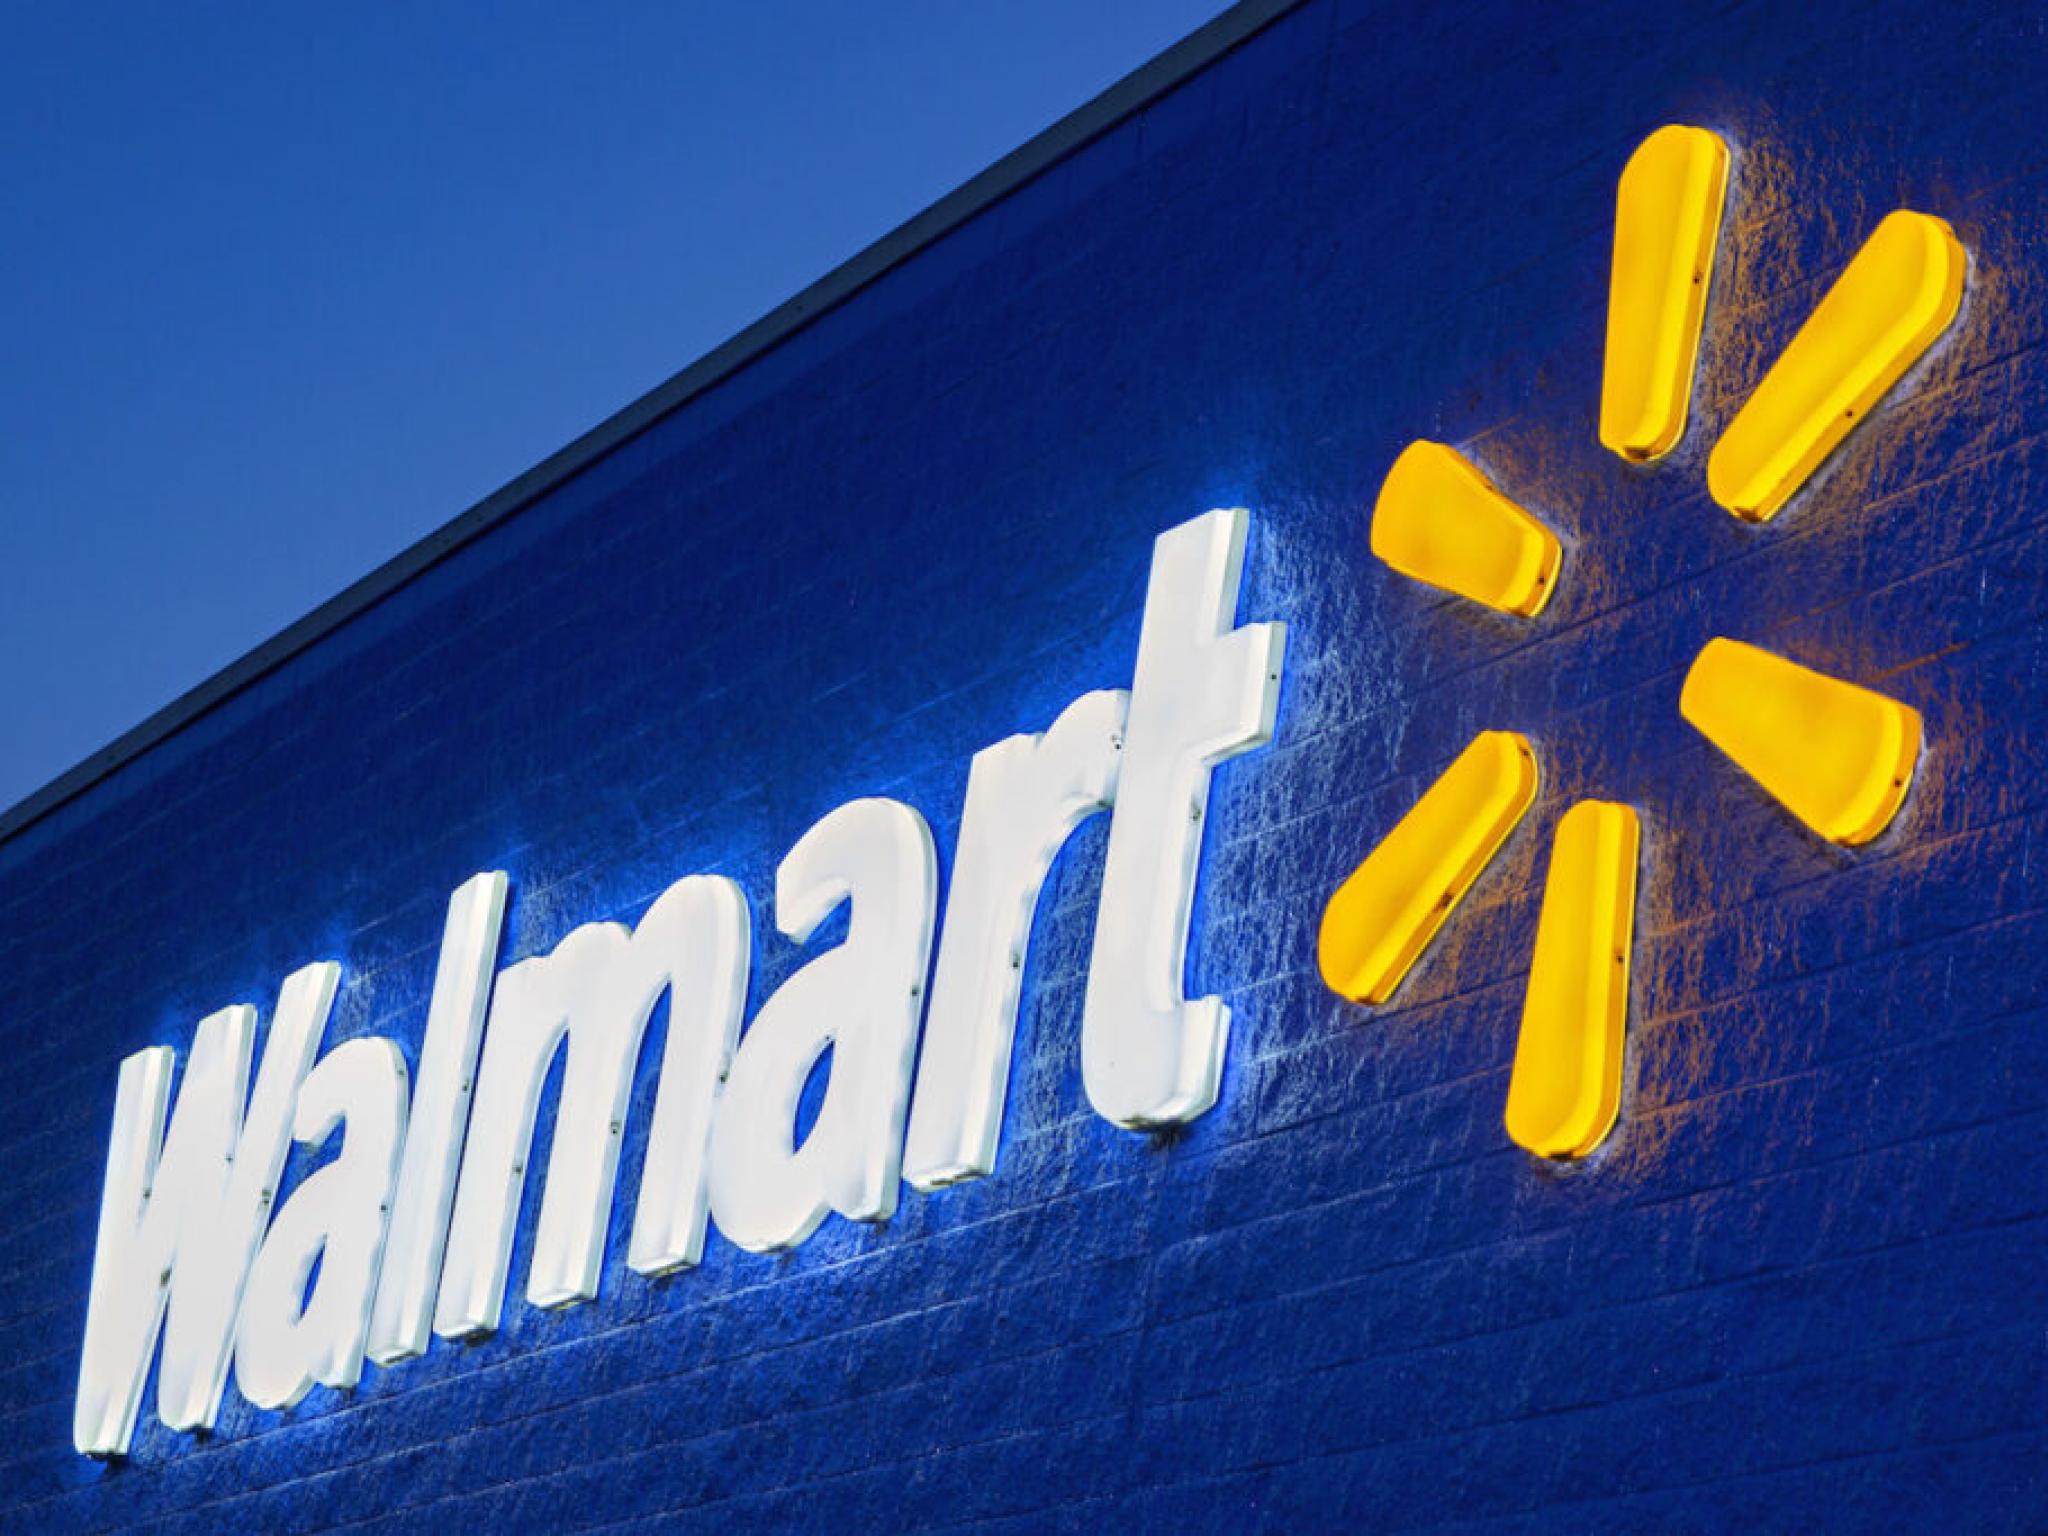 Affirm Stock Drops As Walmart Rolls Out New Payment Options: The Details